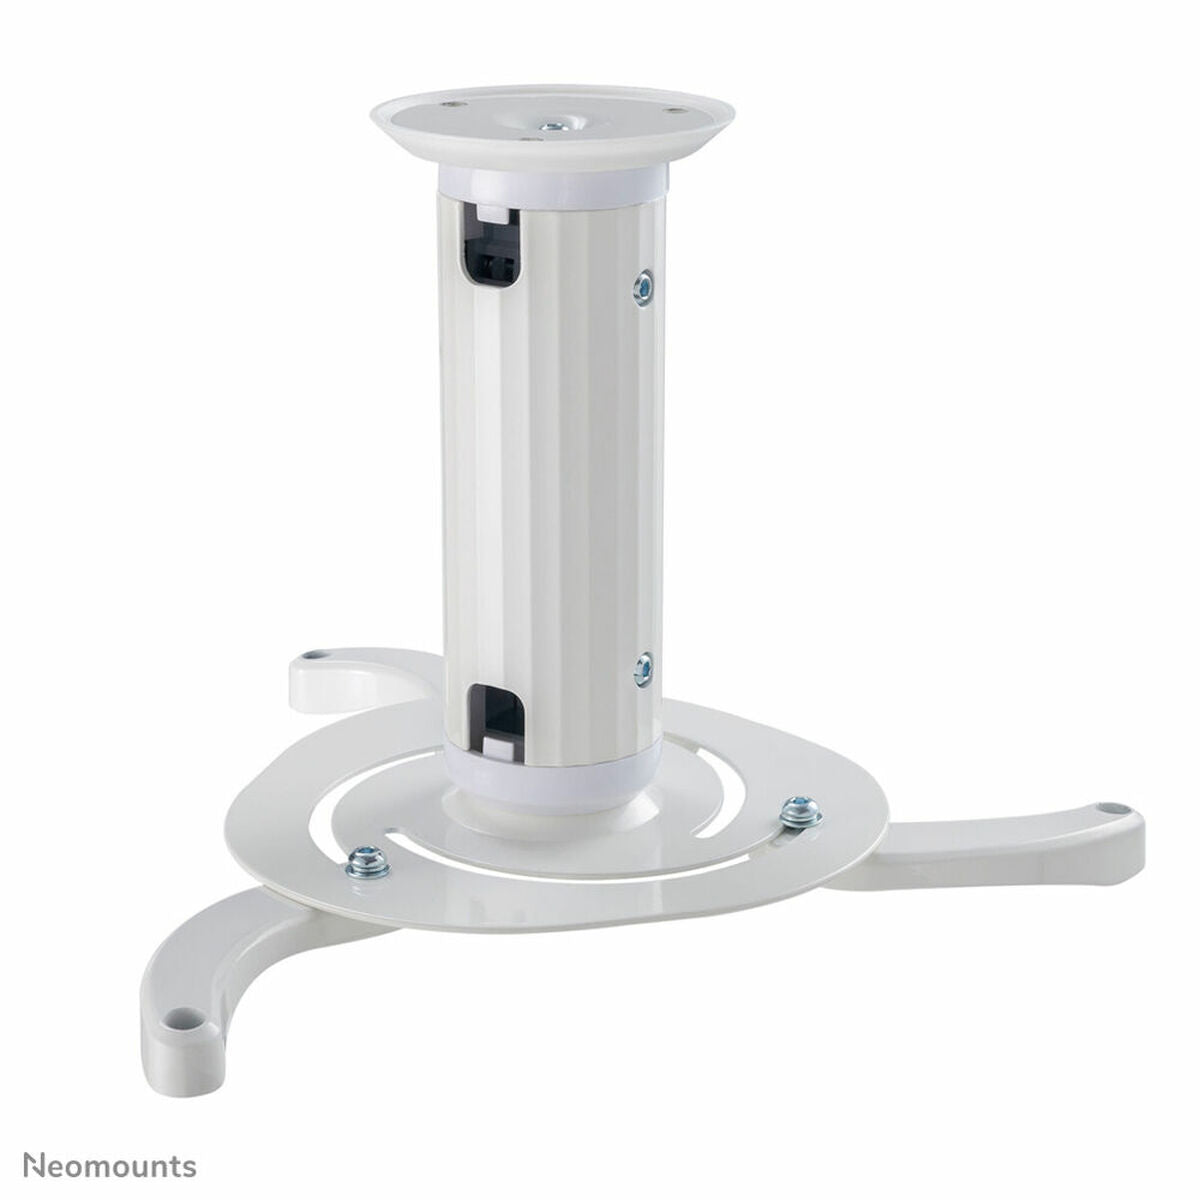 Ceiling Mount for Projectors Neomounts Q610542 White, Neomounts, Electronics, TV, Video and home cinema, ceiling-mount-for-projectors-neomounts-q610542-white, Brand_Neomounts, category-reference-2609, category-reference-2642, category-reference-2947, category-reference-t-18805, category-reference-t-19653, category-reference-t-19921, category-reference-t-21391, computers / peripherals, Condition_NEW, office, Price_50 - 100, RiotNook